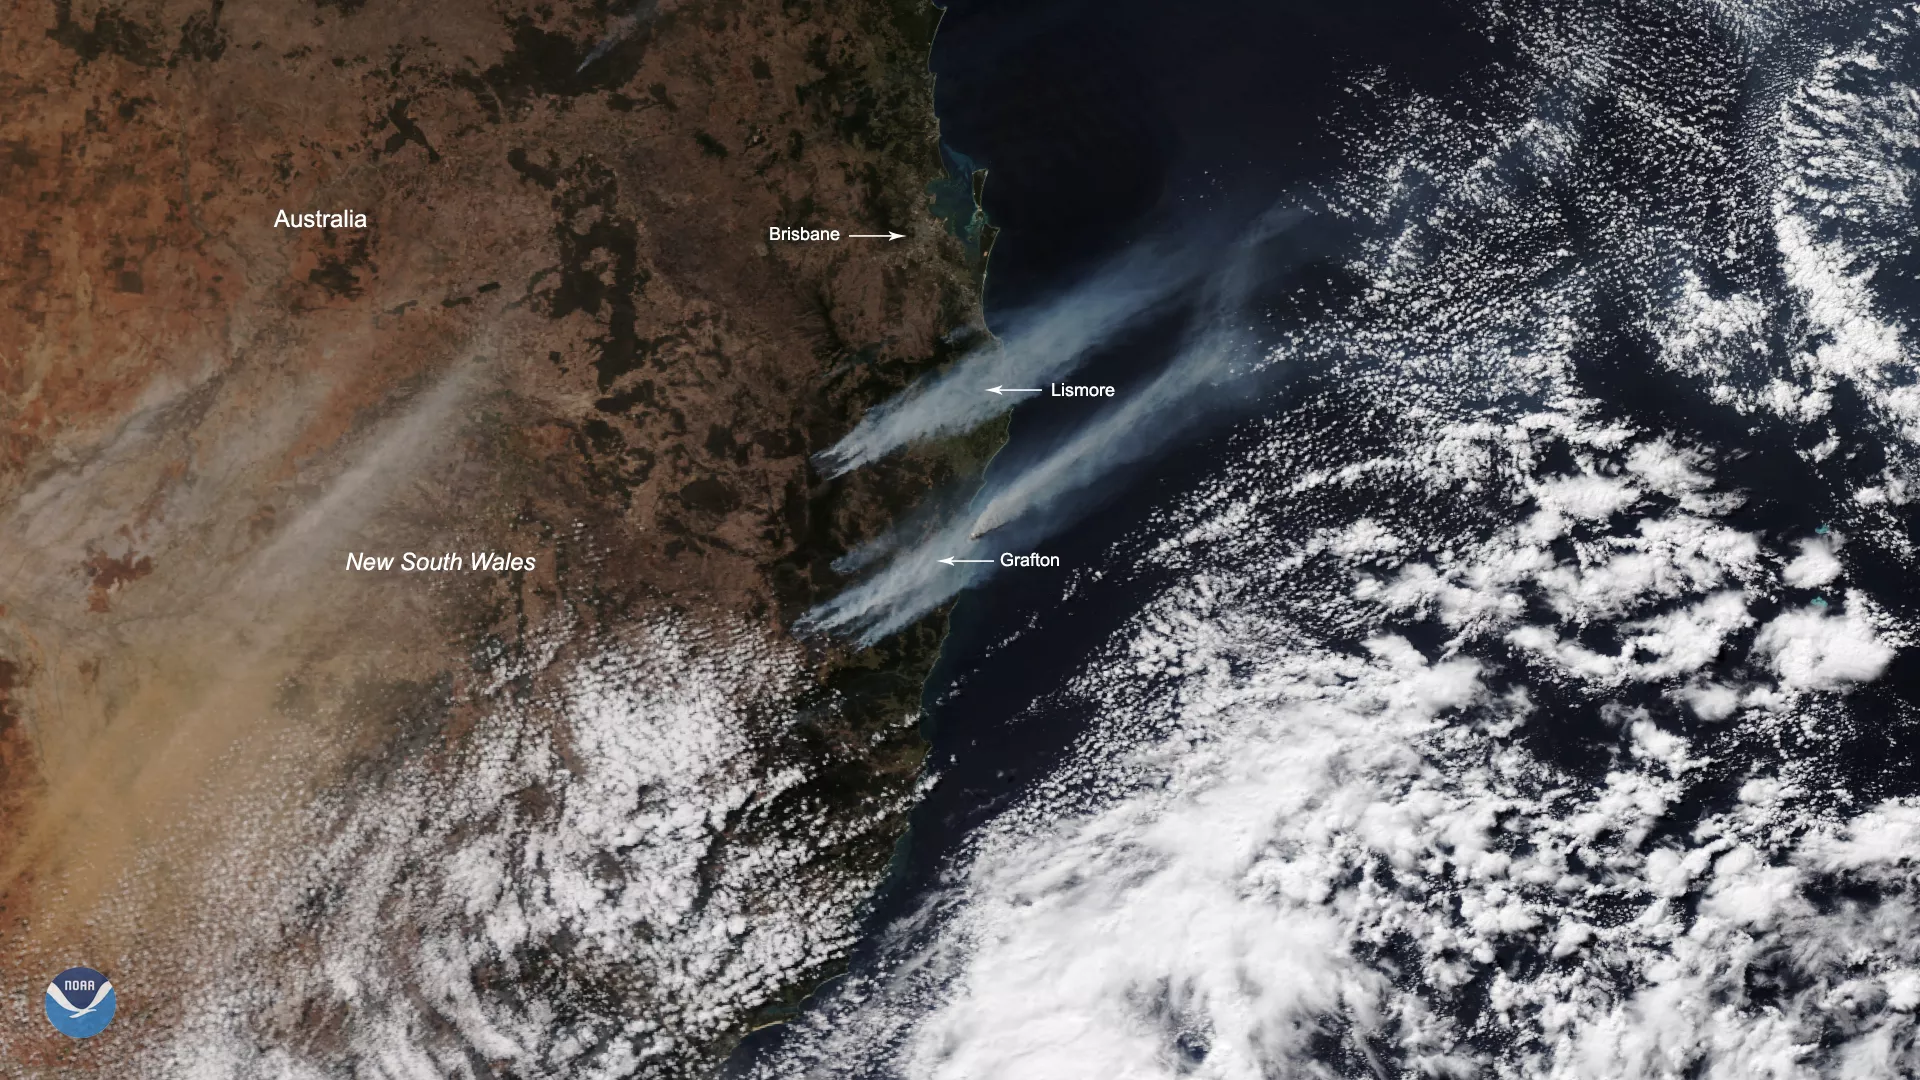 New South Wales and Queensland, Australia fire imagery via NOAA-20's VIIRS, Sept. 2019.